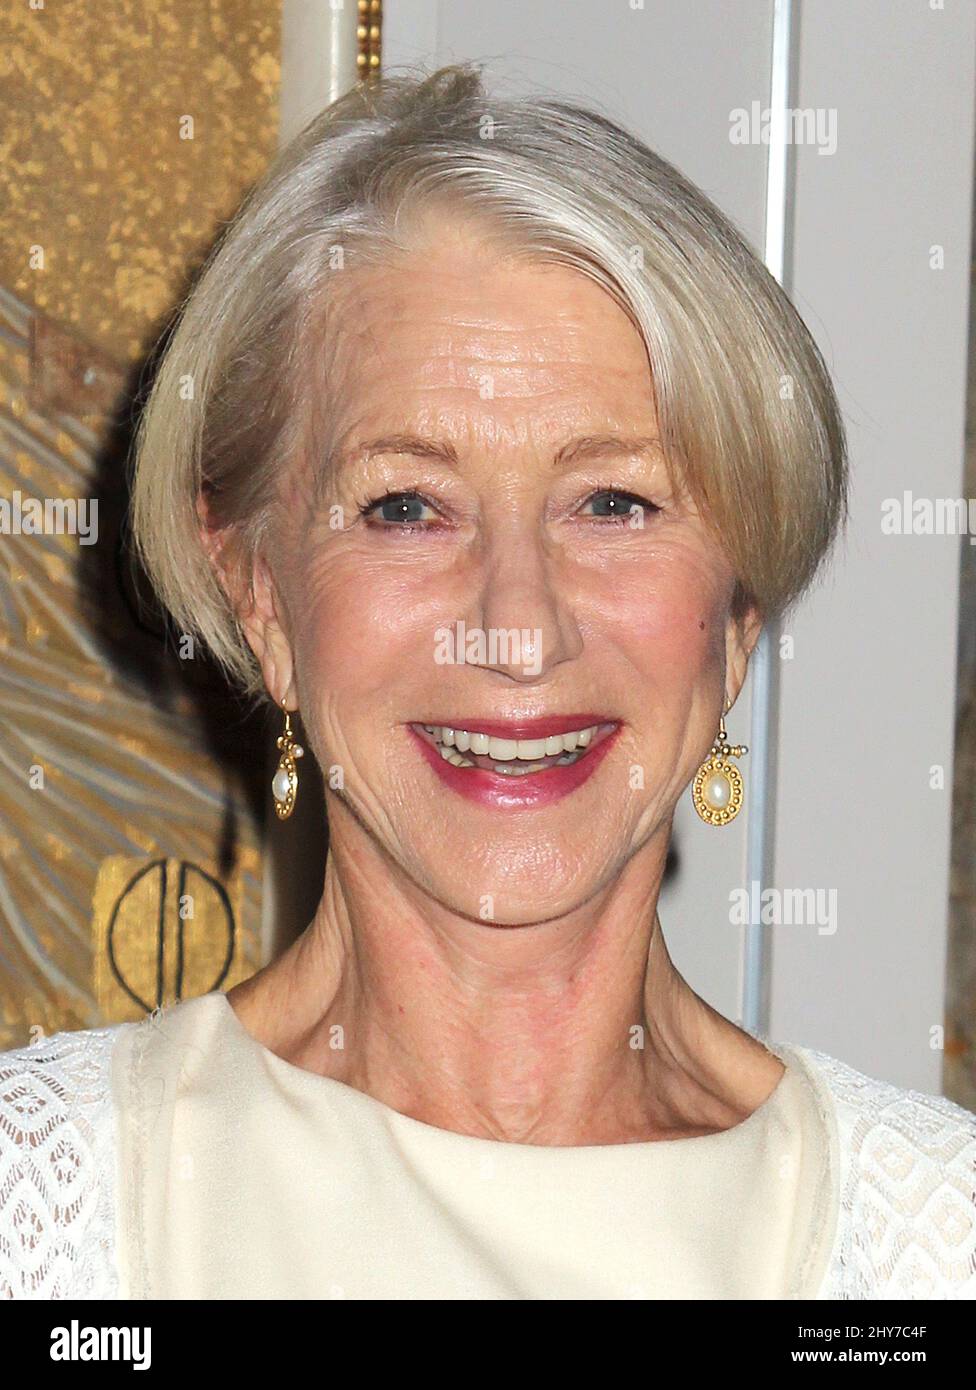 Helen Mirren attending a photocall honouring her role in 'Woman In Gold' at the Neue Galerie in New York. Stock Photo